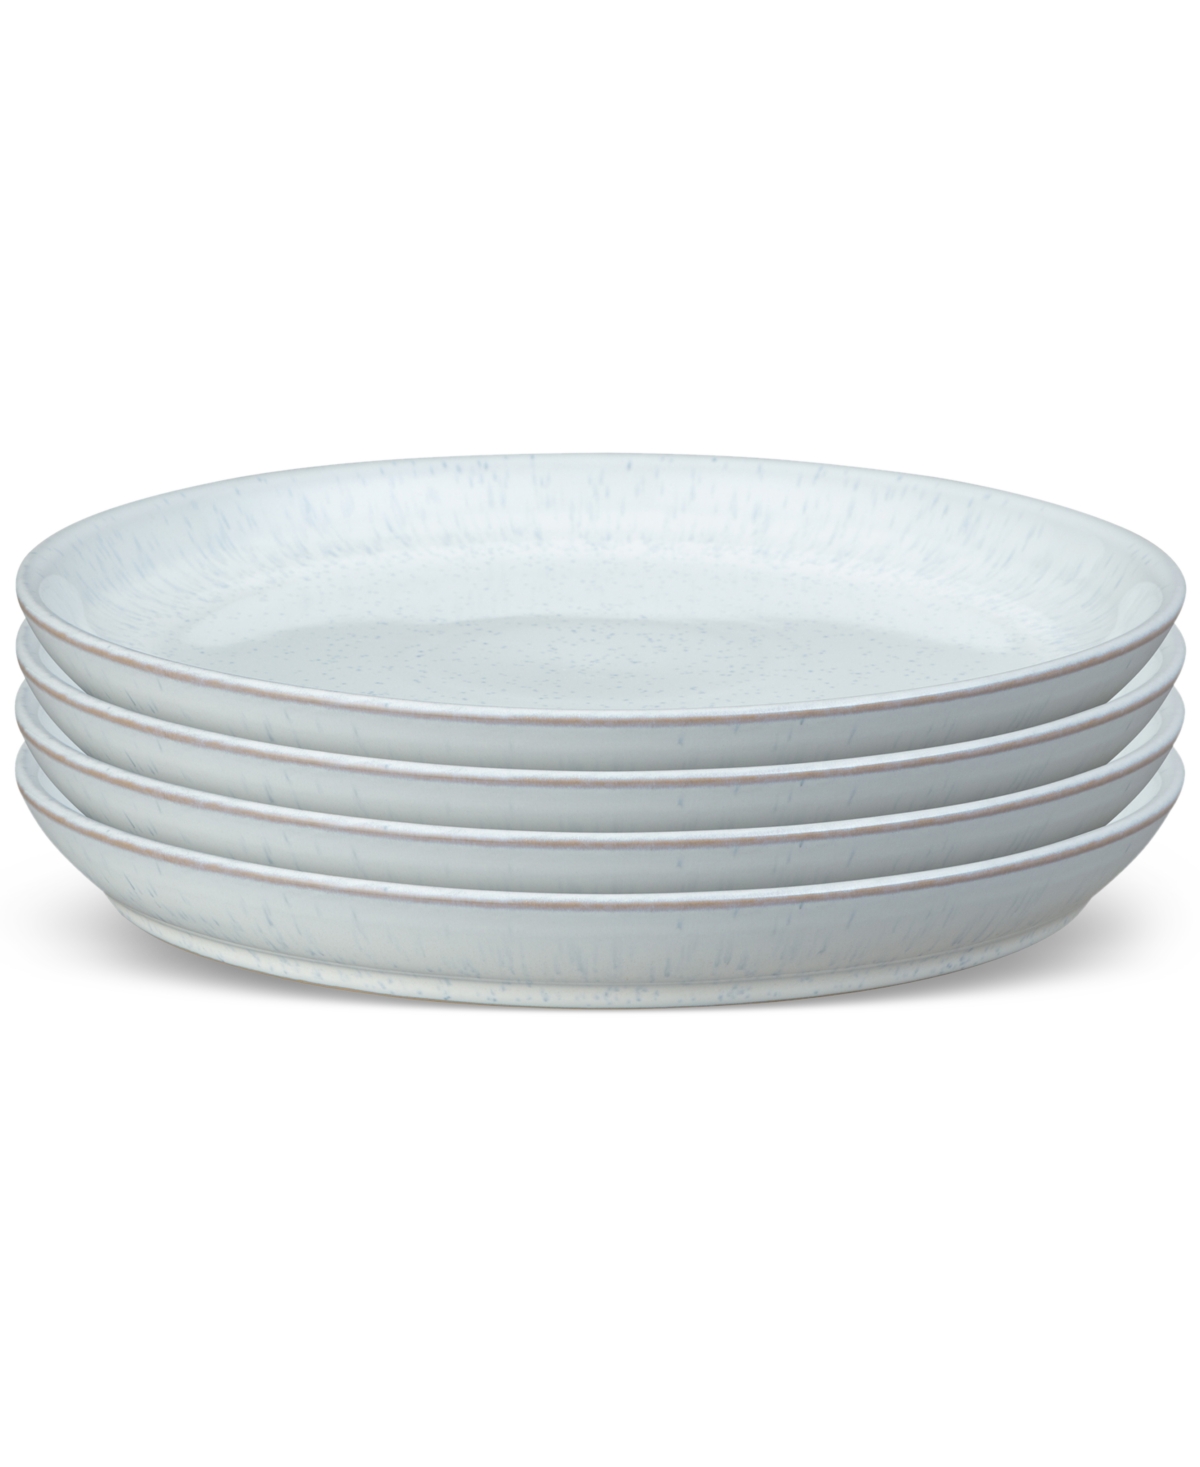 White Speckle Stoneware Coupe Dinner Plates, Set of 4 - White